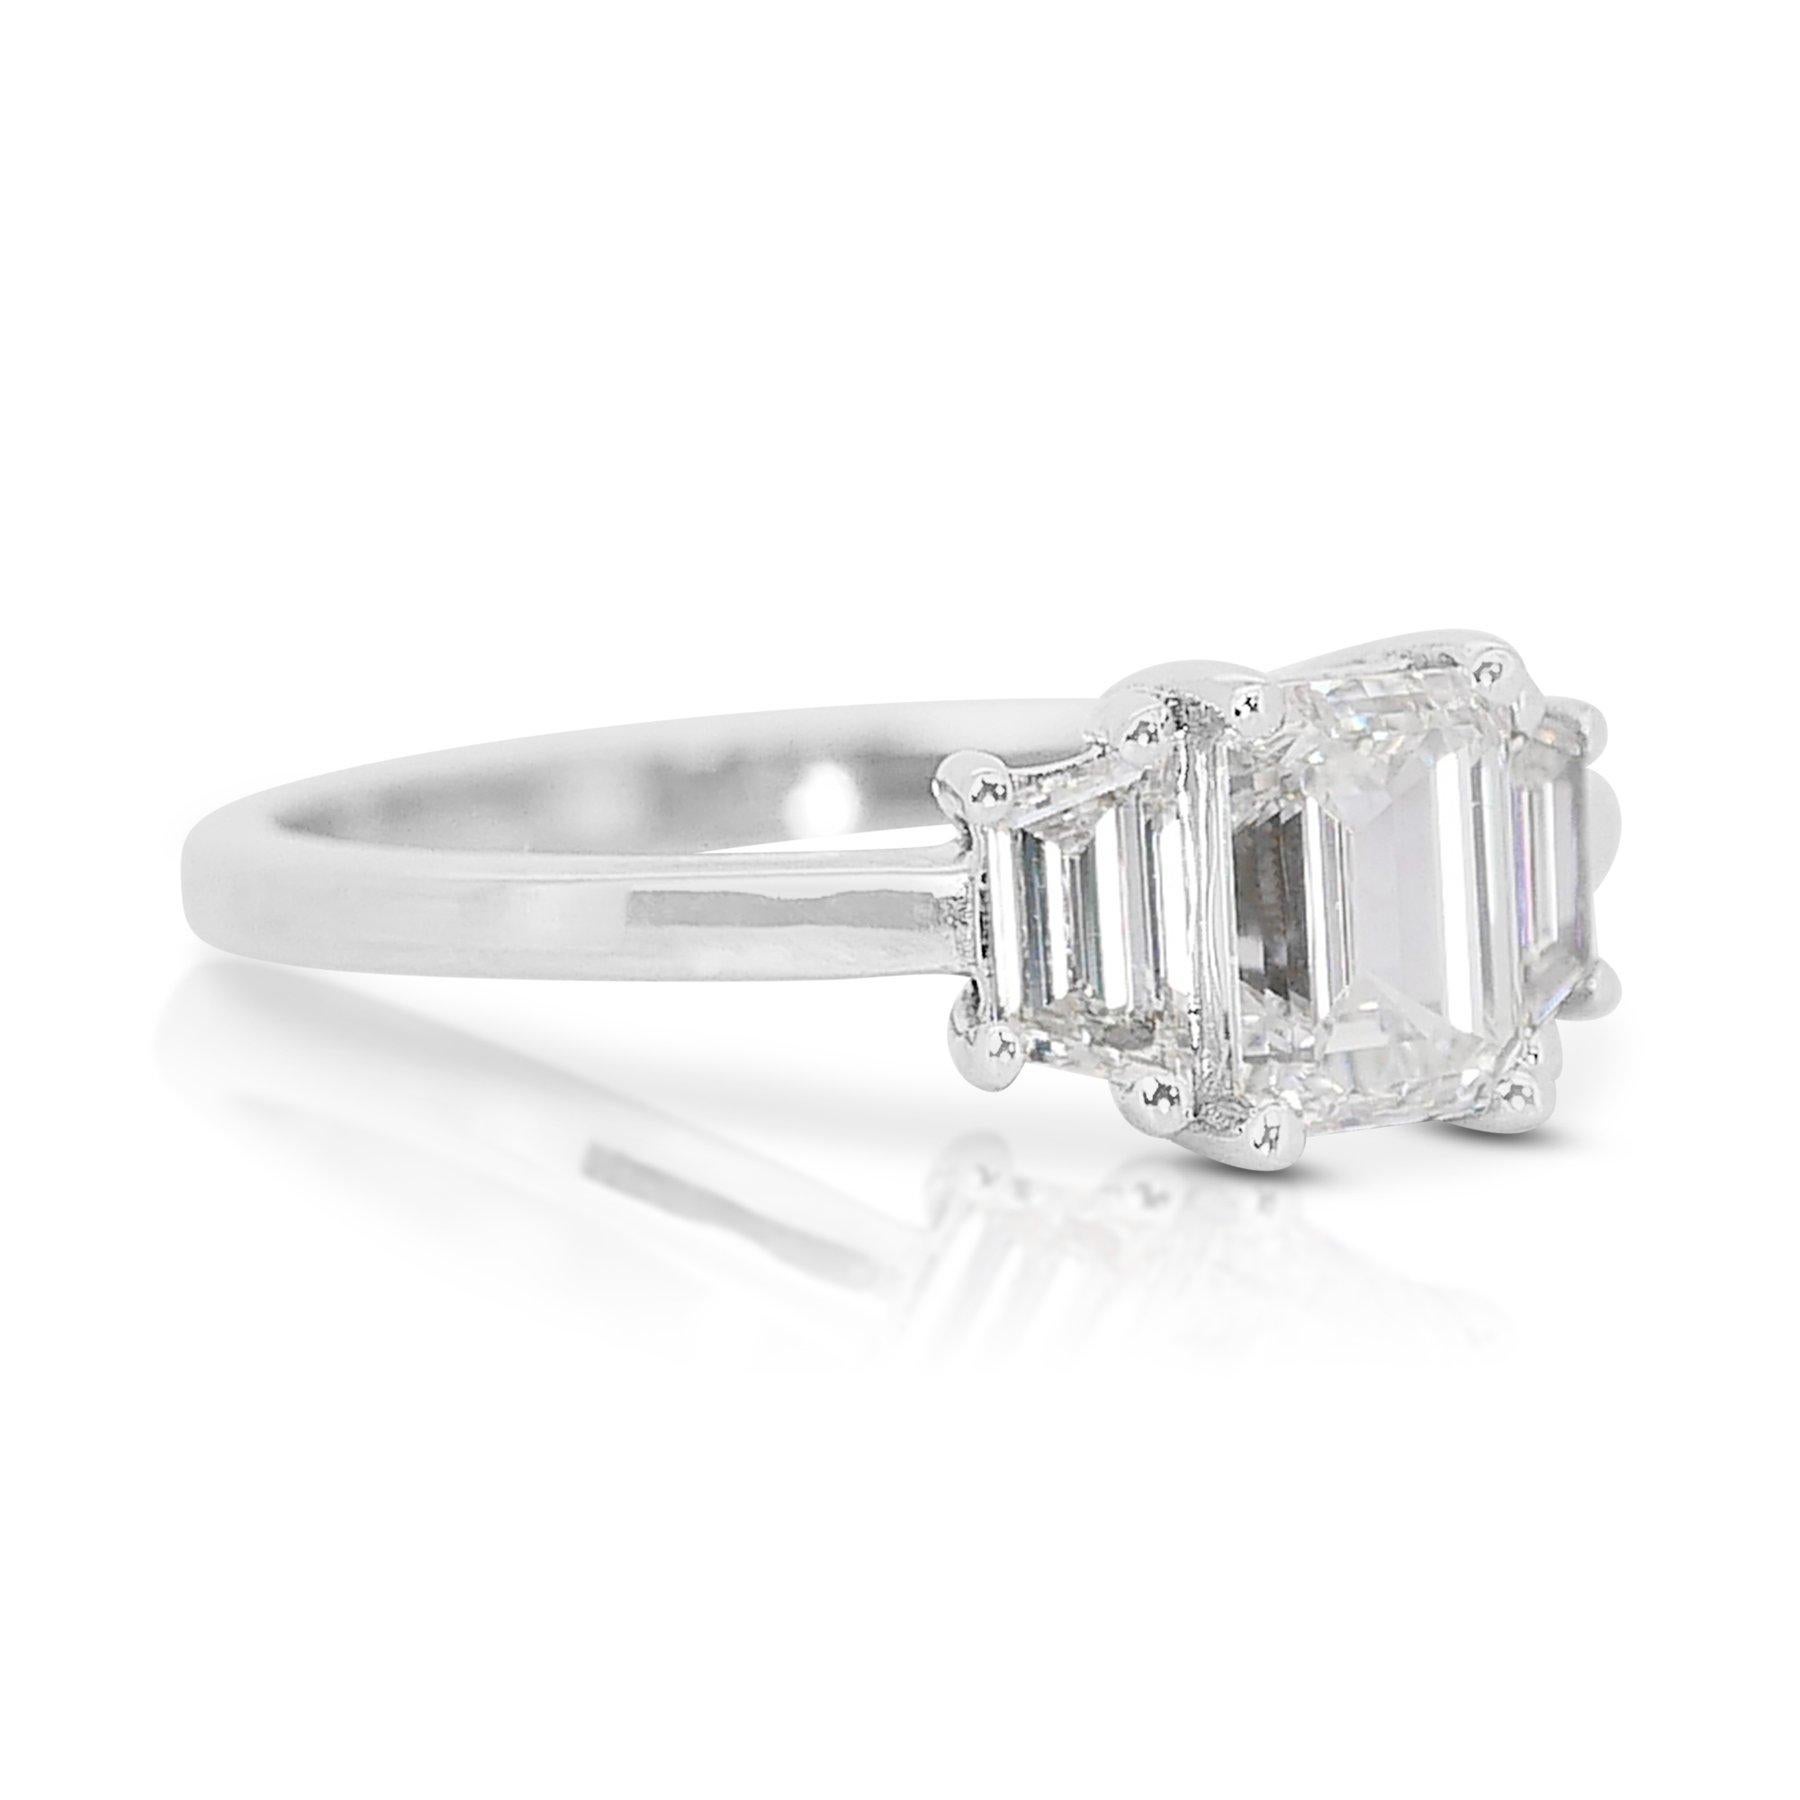 Magnificent 1.35ct Diamond 3-Stone Ring in 18k White Gold - GIA Certified

A captivating 18k white gold diamond ring, featuring a stunning 1.00-carat emerald-cut diamond as its centerpiece. Complementing the central diamond are 2 trapezoid side